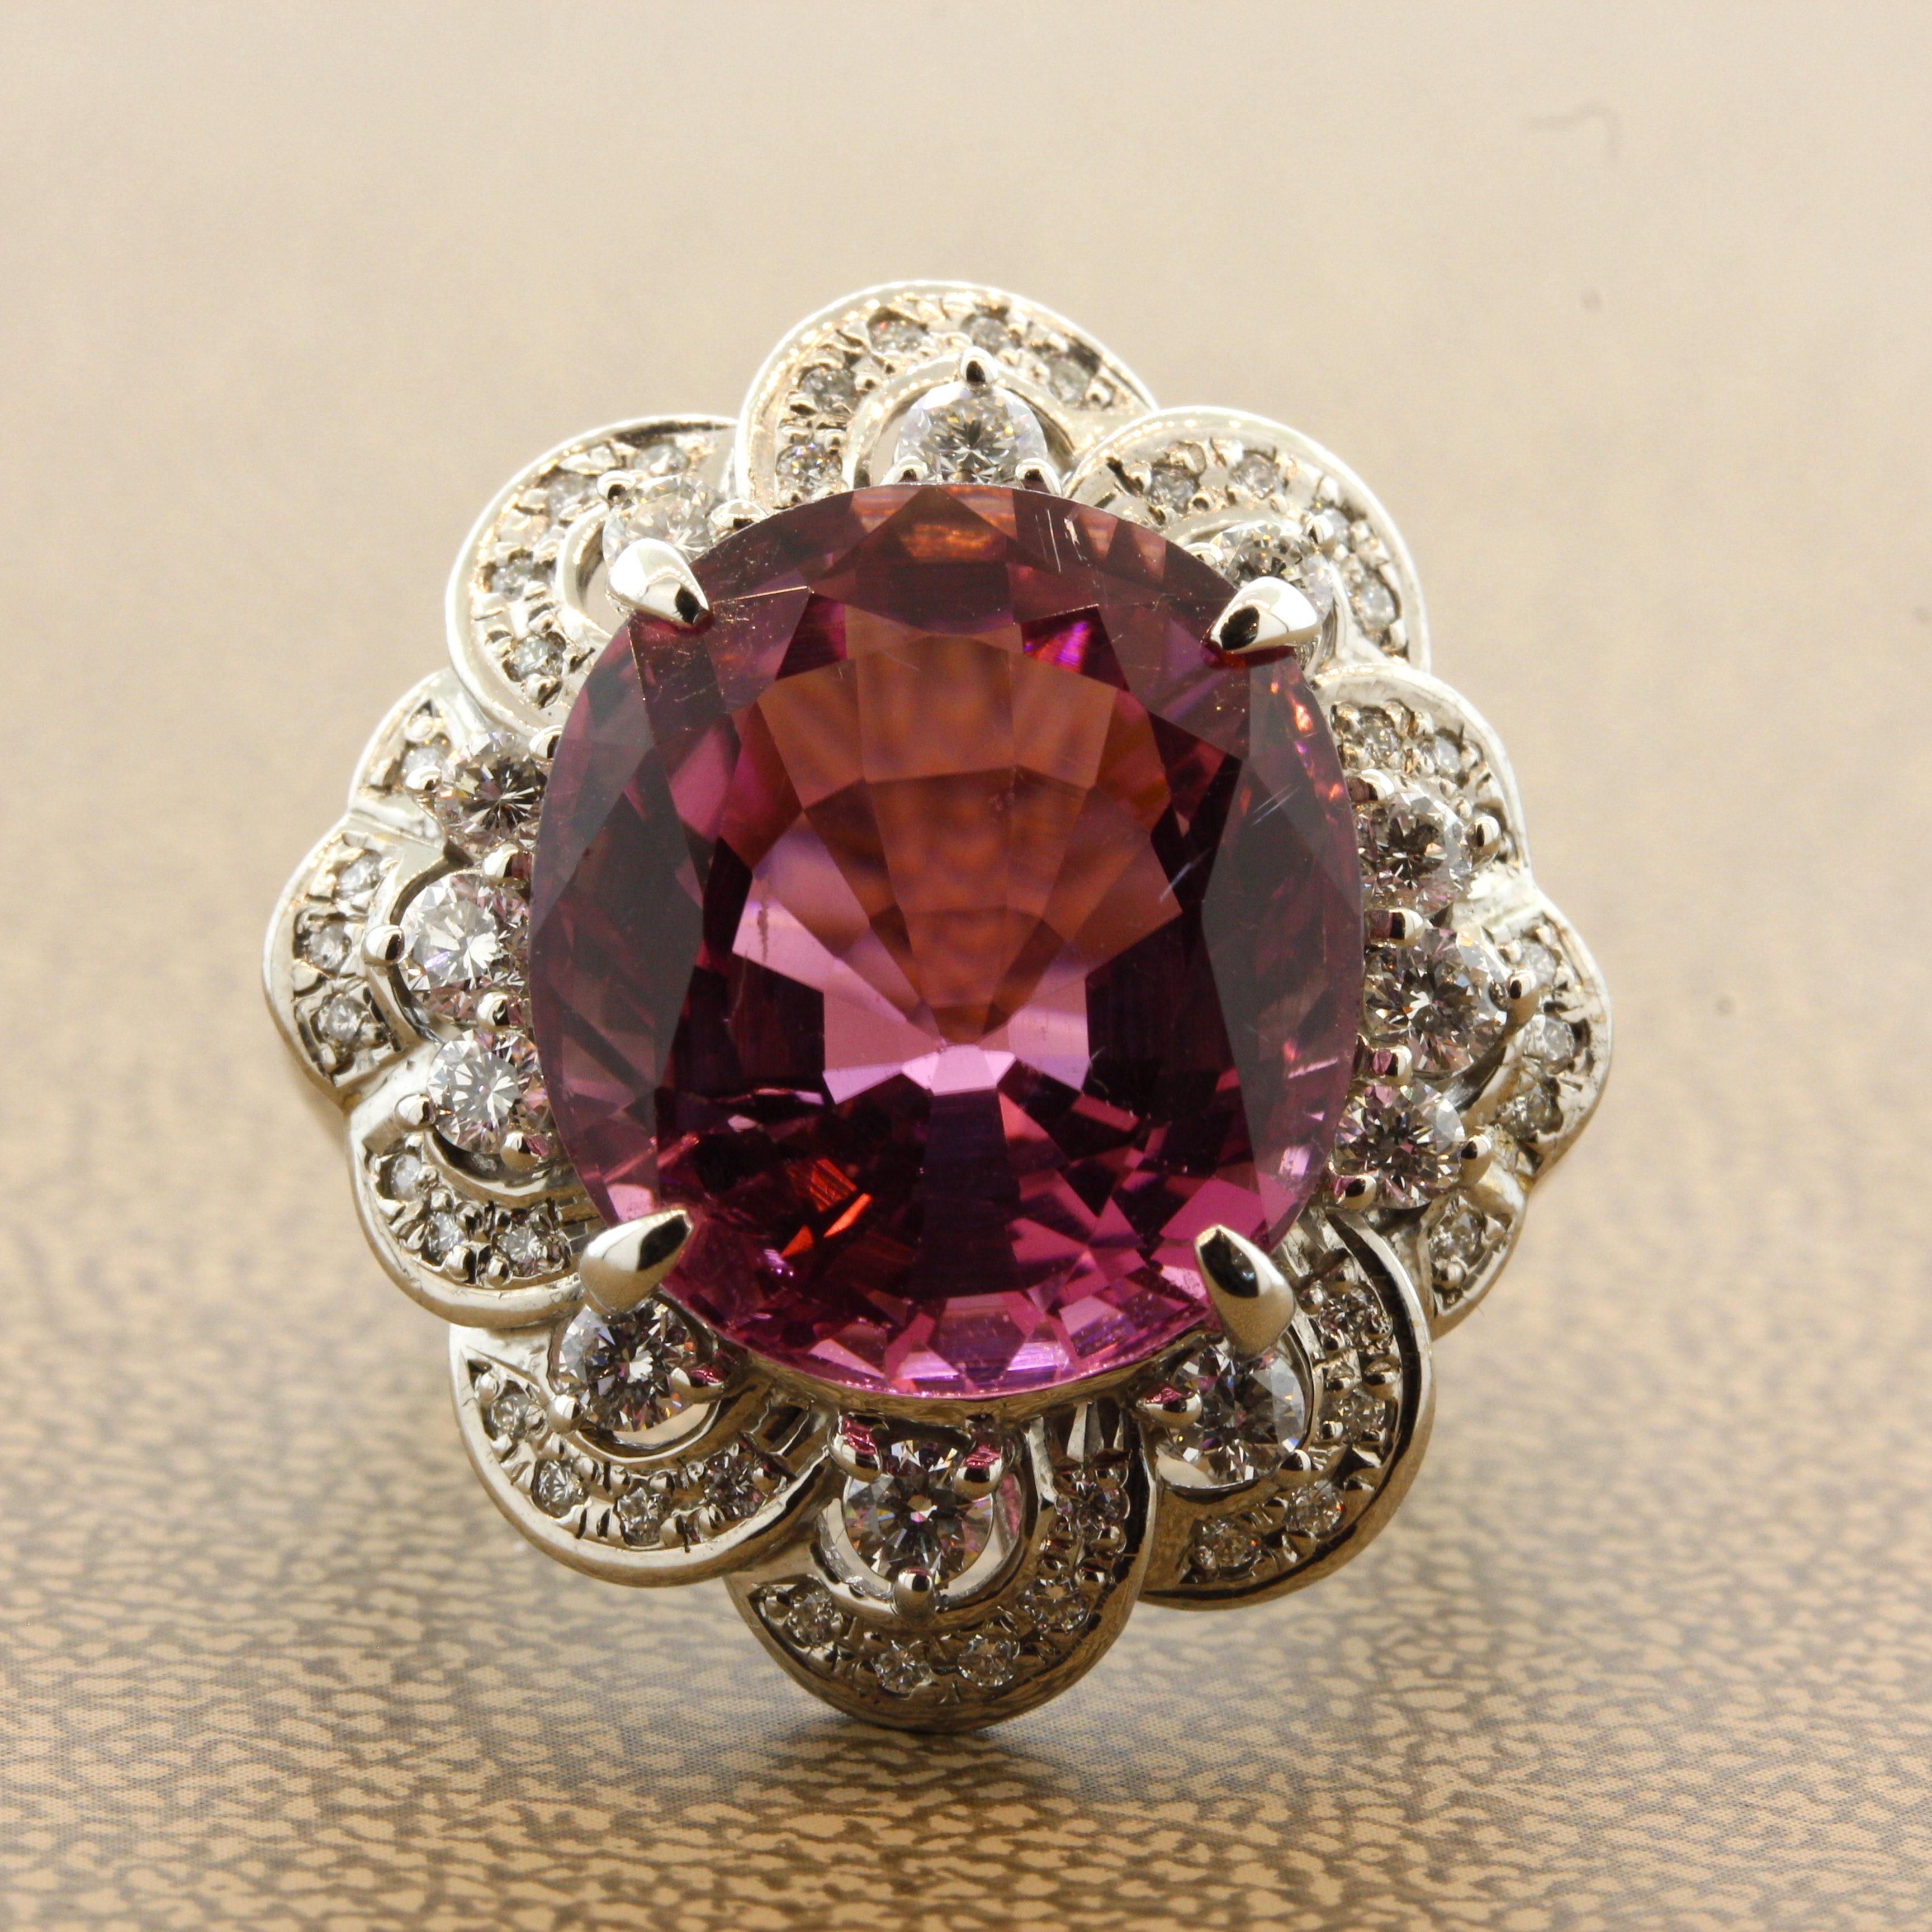 A large, fine, and impressive tourmaline weighing 13.61 carats takes center stage of this platinum made ring. It has a rich, even pink color with excellent clarity allowing the stone's natural color to shine free from any light blockage. It is